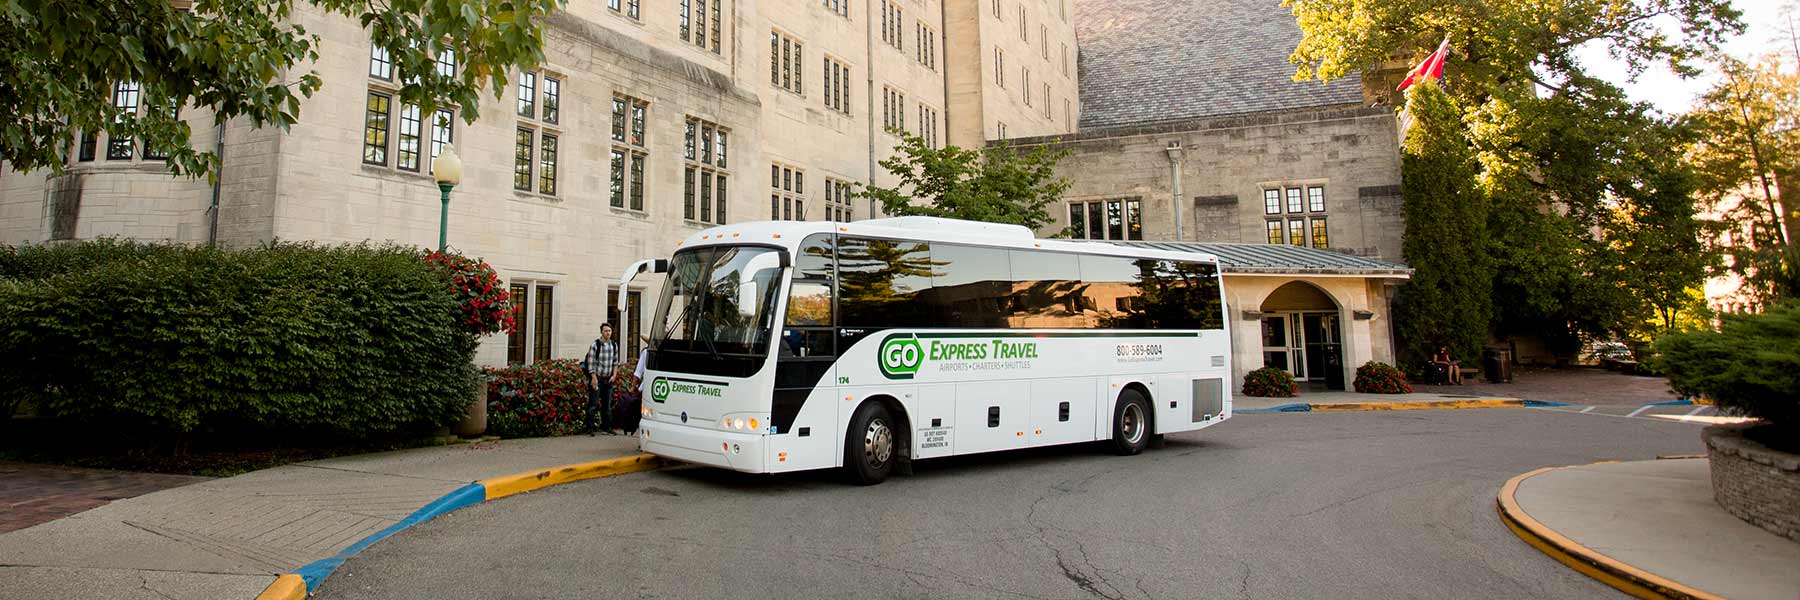 A Go Express Travel bus parked in the circle drive of Memorial Union